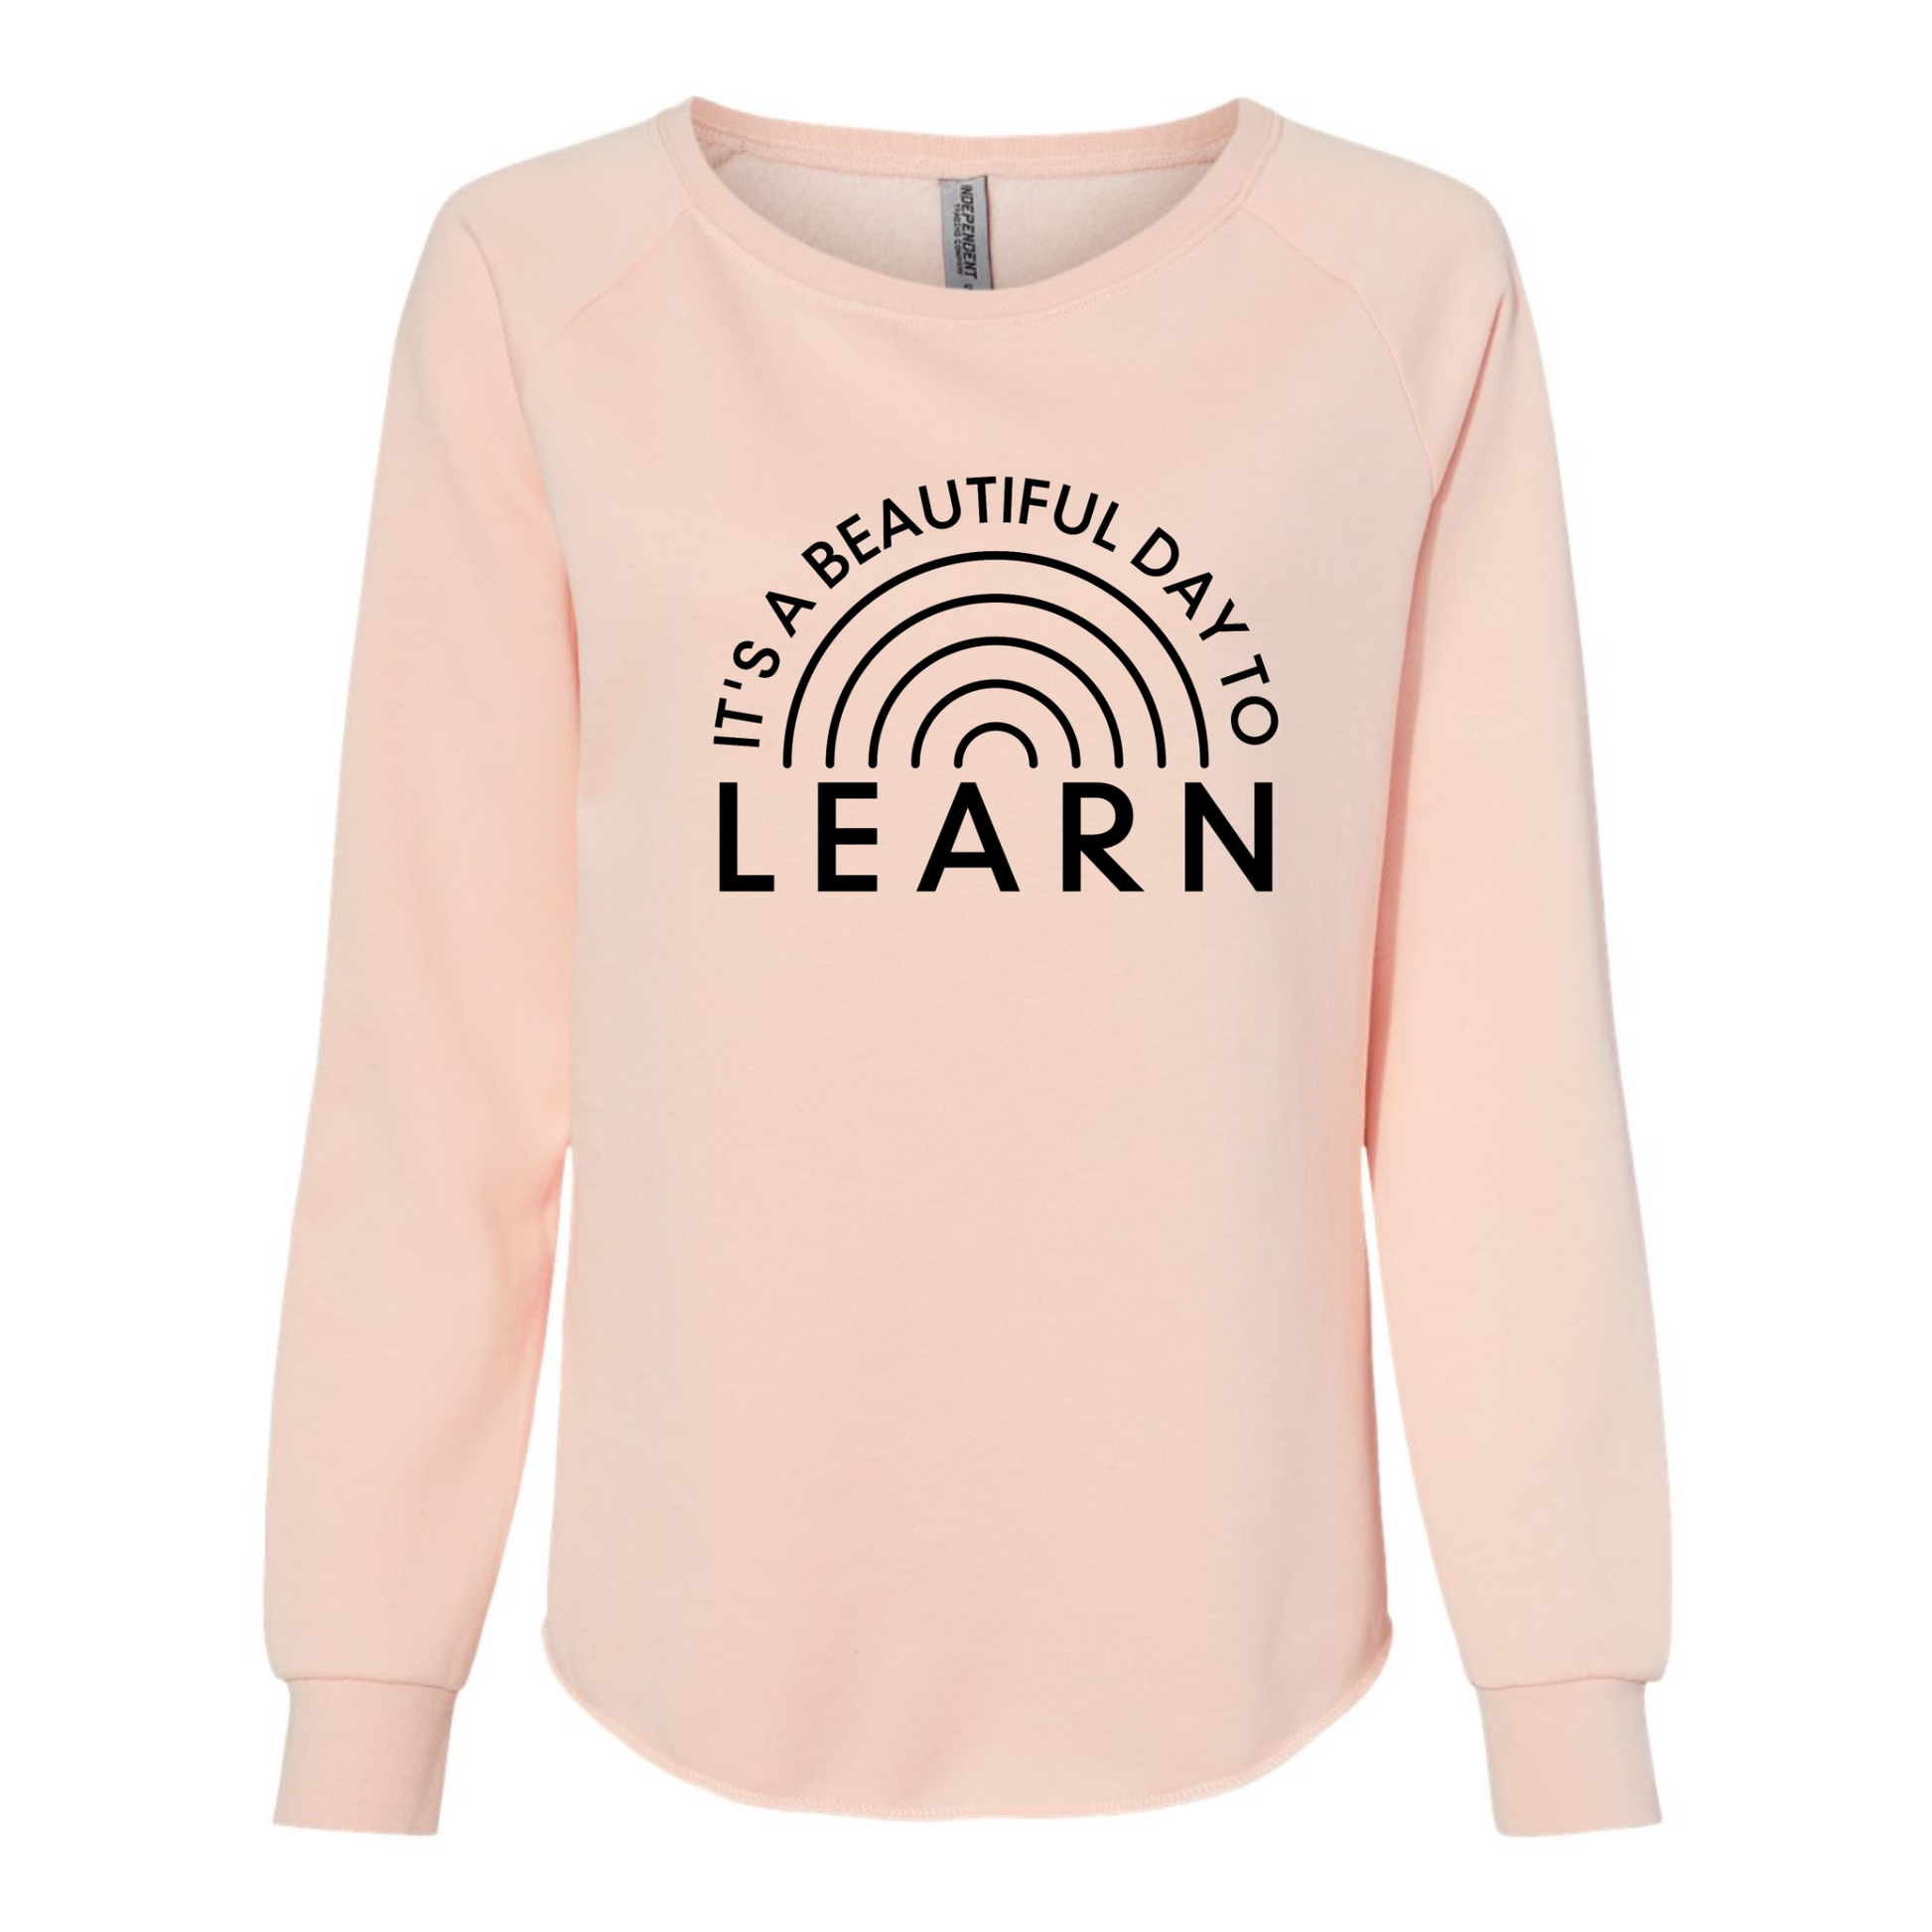 It's A Beautiful Day To Learn Crewneck Sweatshirt in pink - front view.